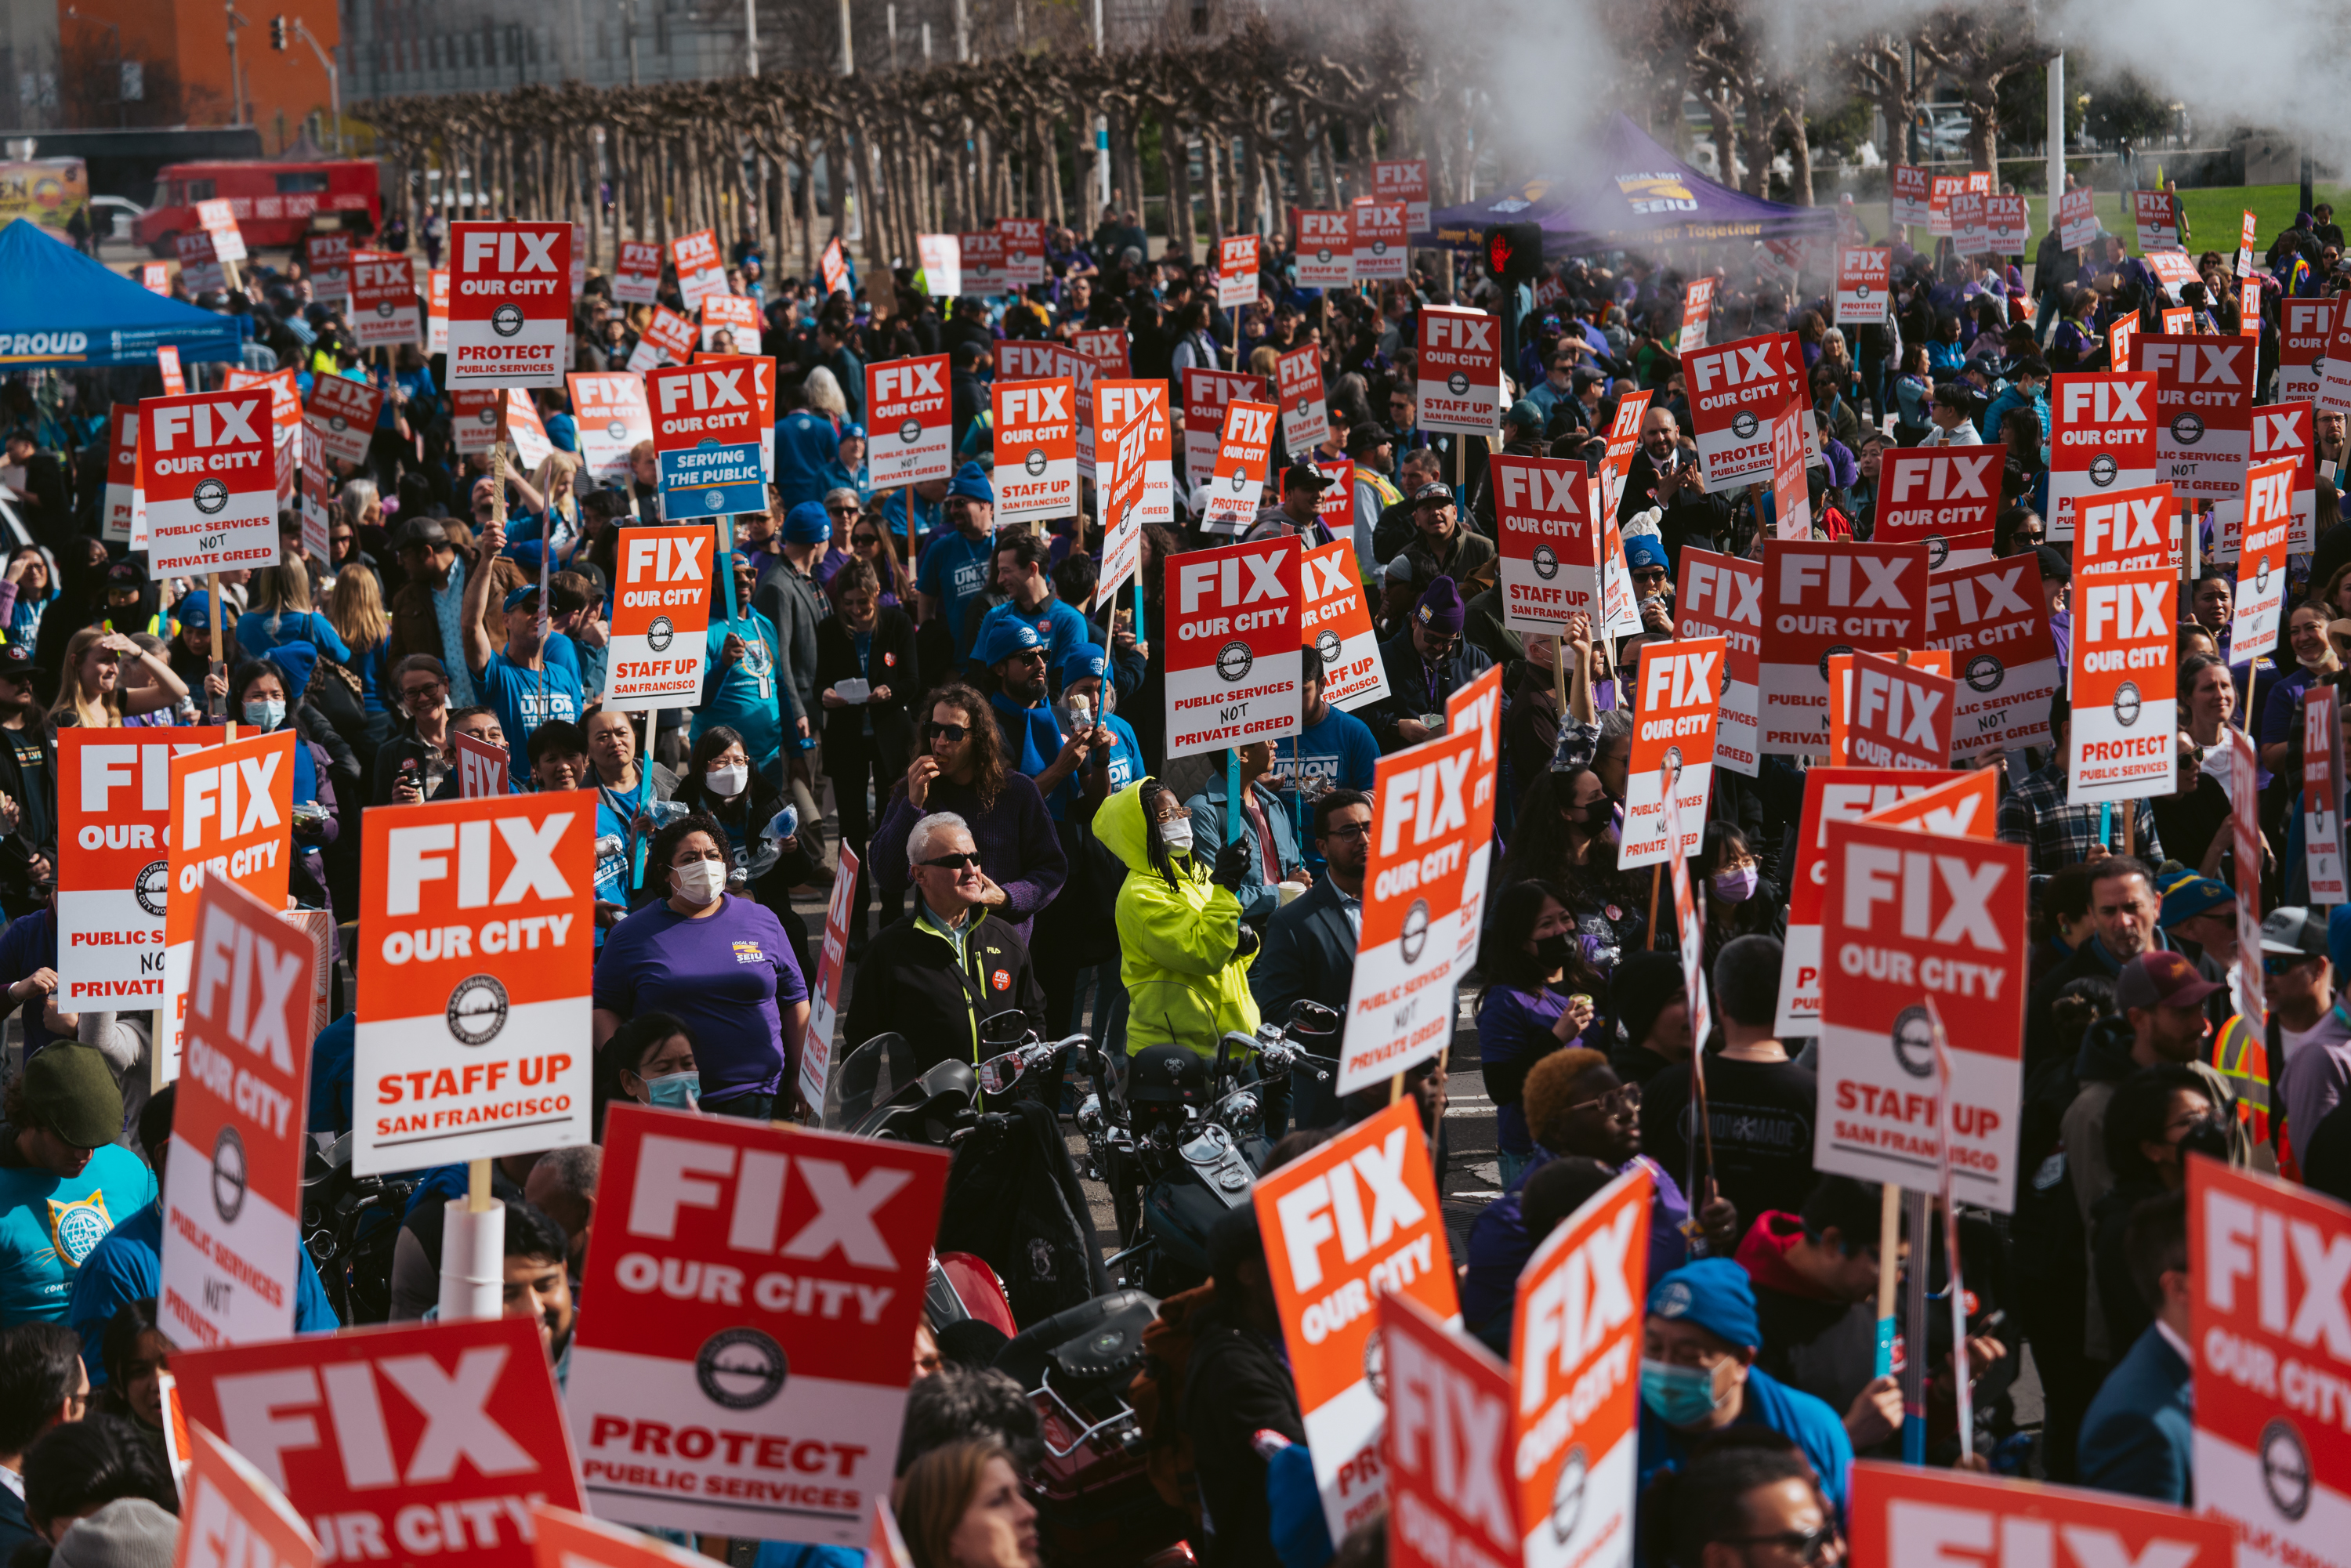 A large crowd holding signs that read &quot;FIX OUR CITY&quot; during a protest or rally, with many wearing blue and purple.